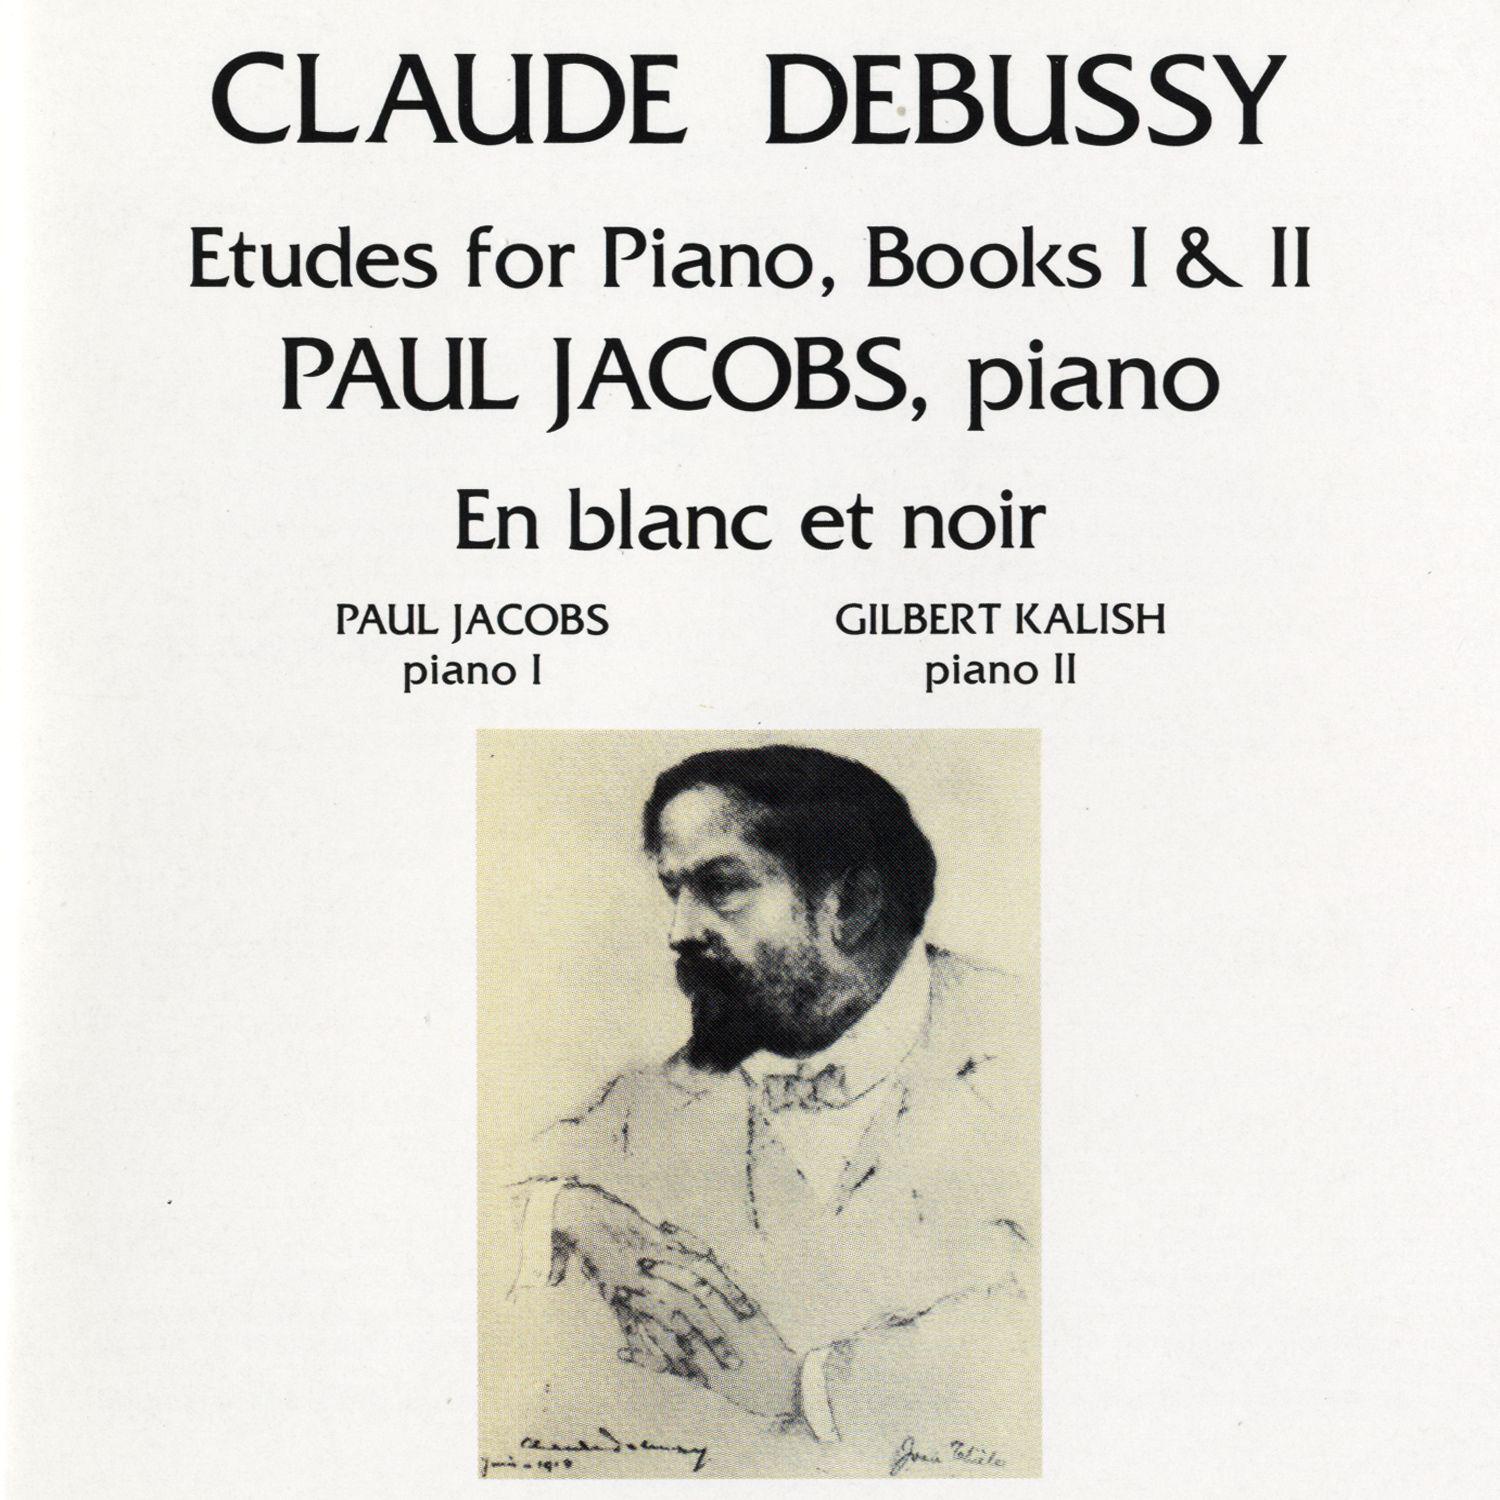 Debussy: Etudes for Piano, Book II; Pour les sonorites opposees